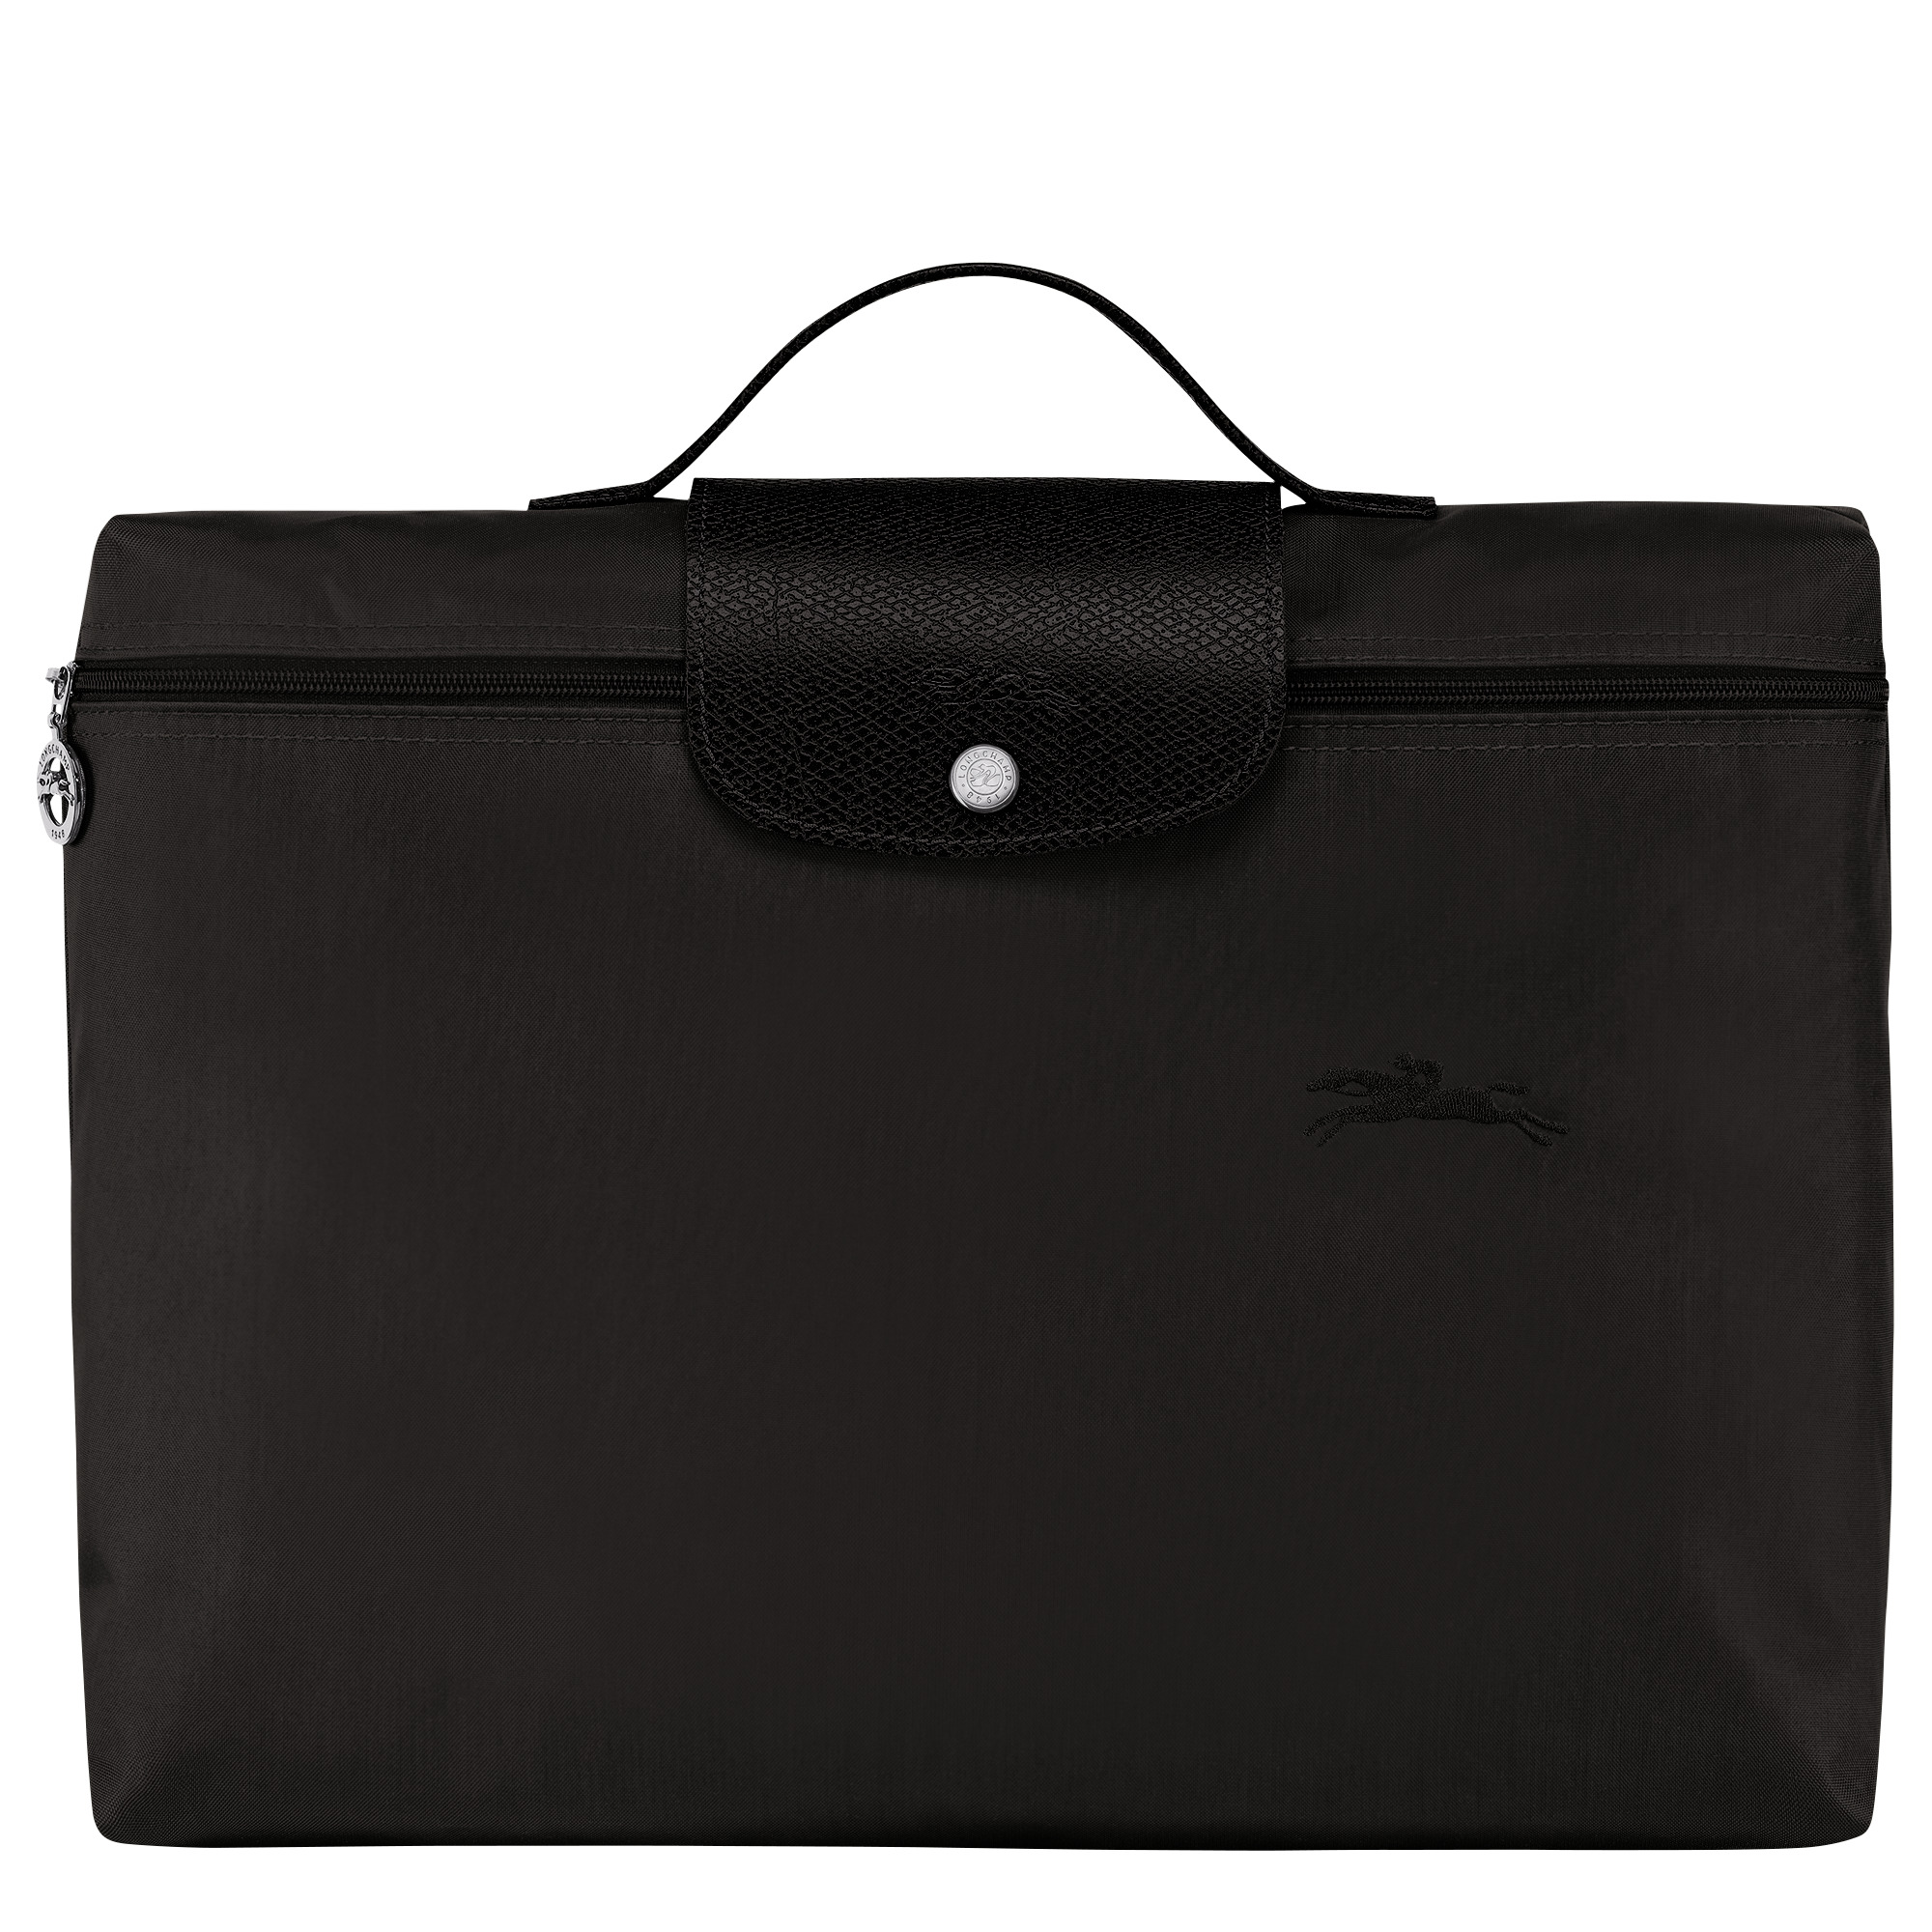 Le Pliage Green S Briefcase Black - Recycled canvas - 1